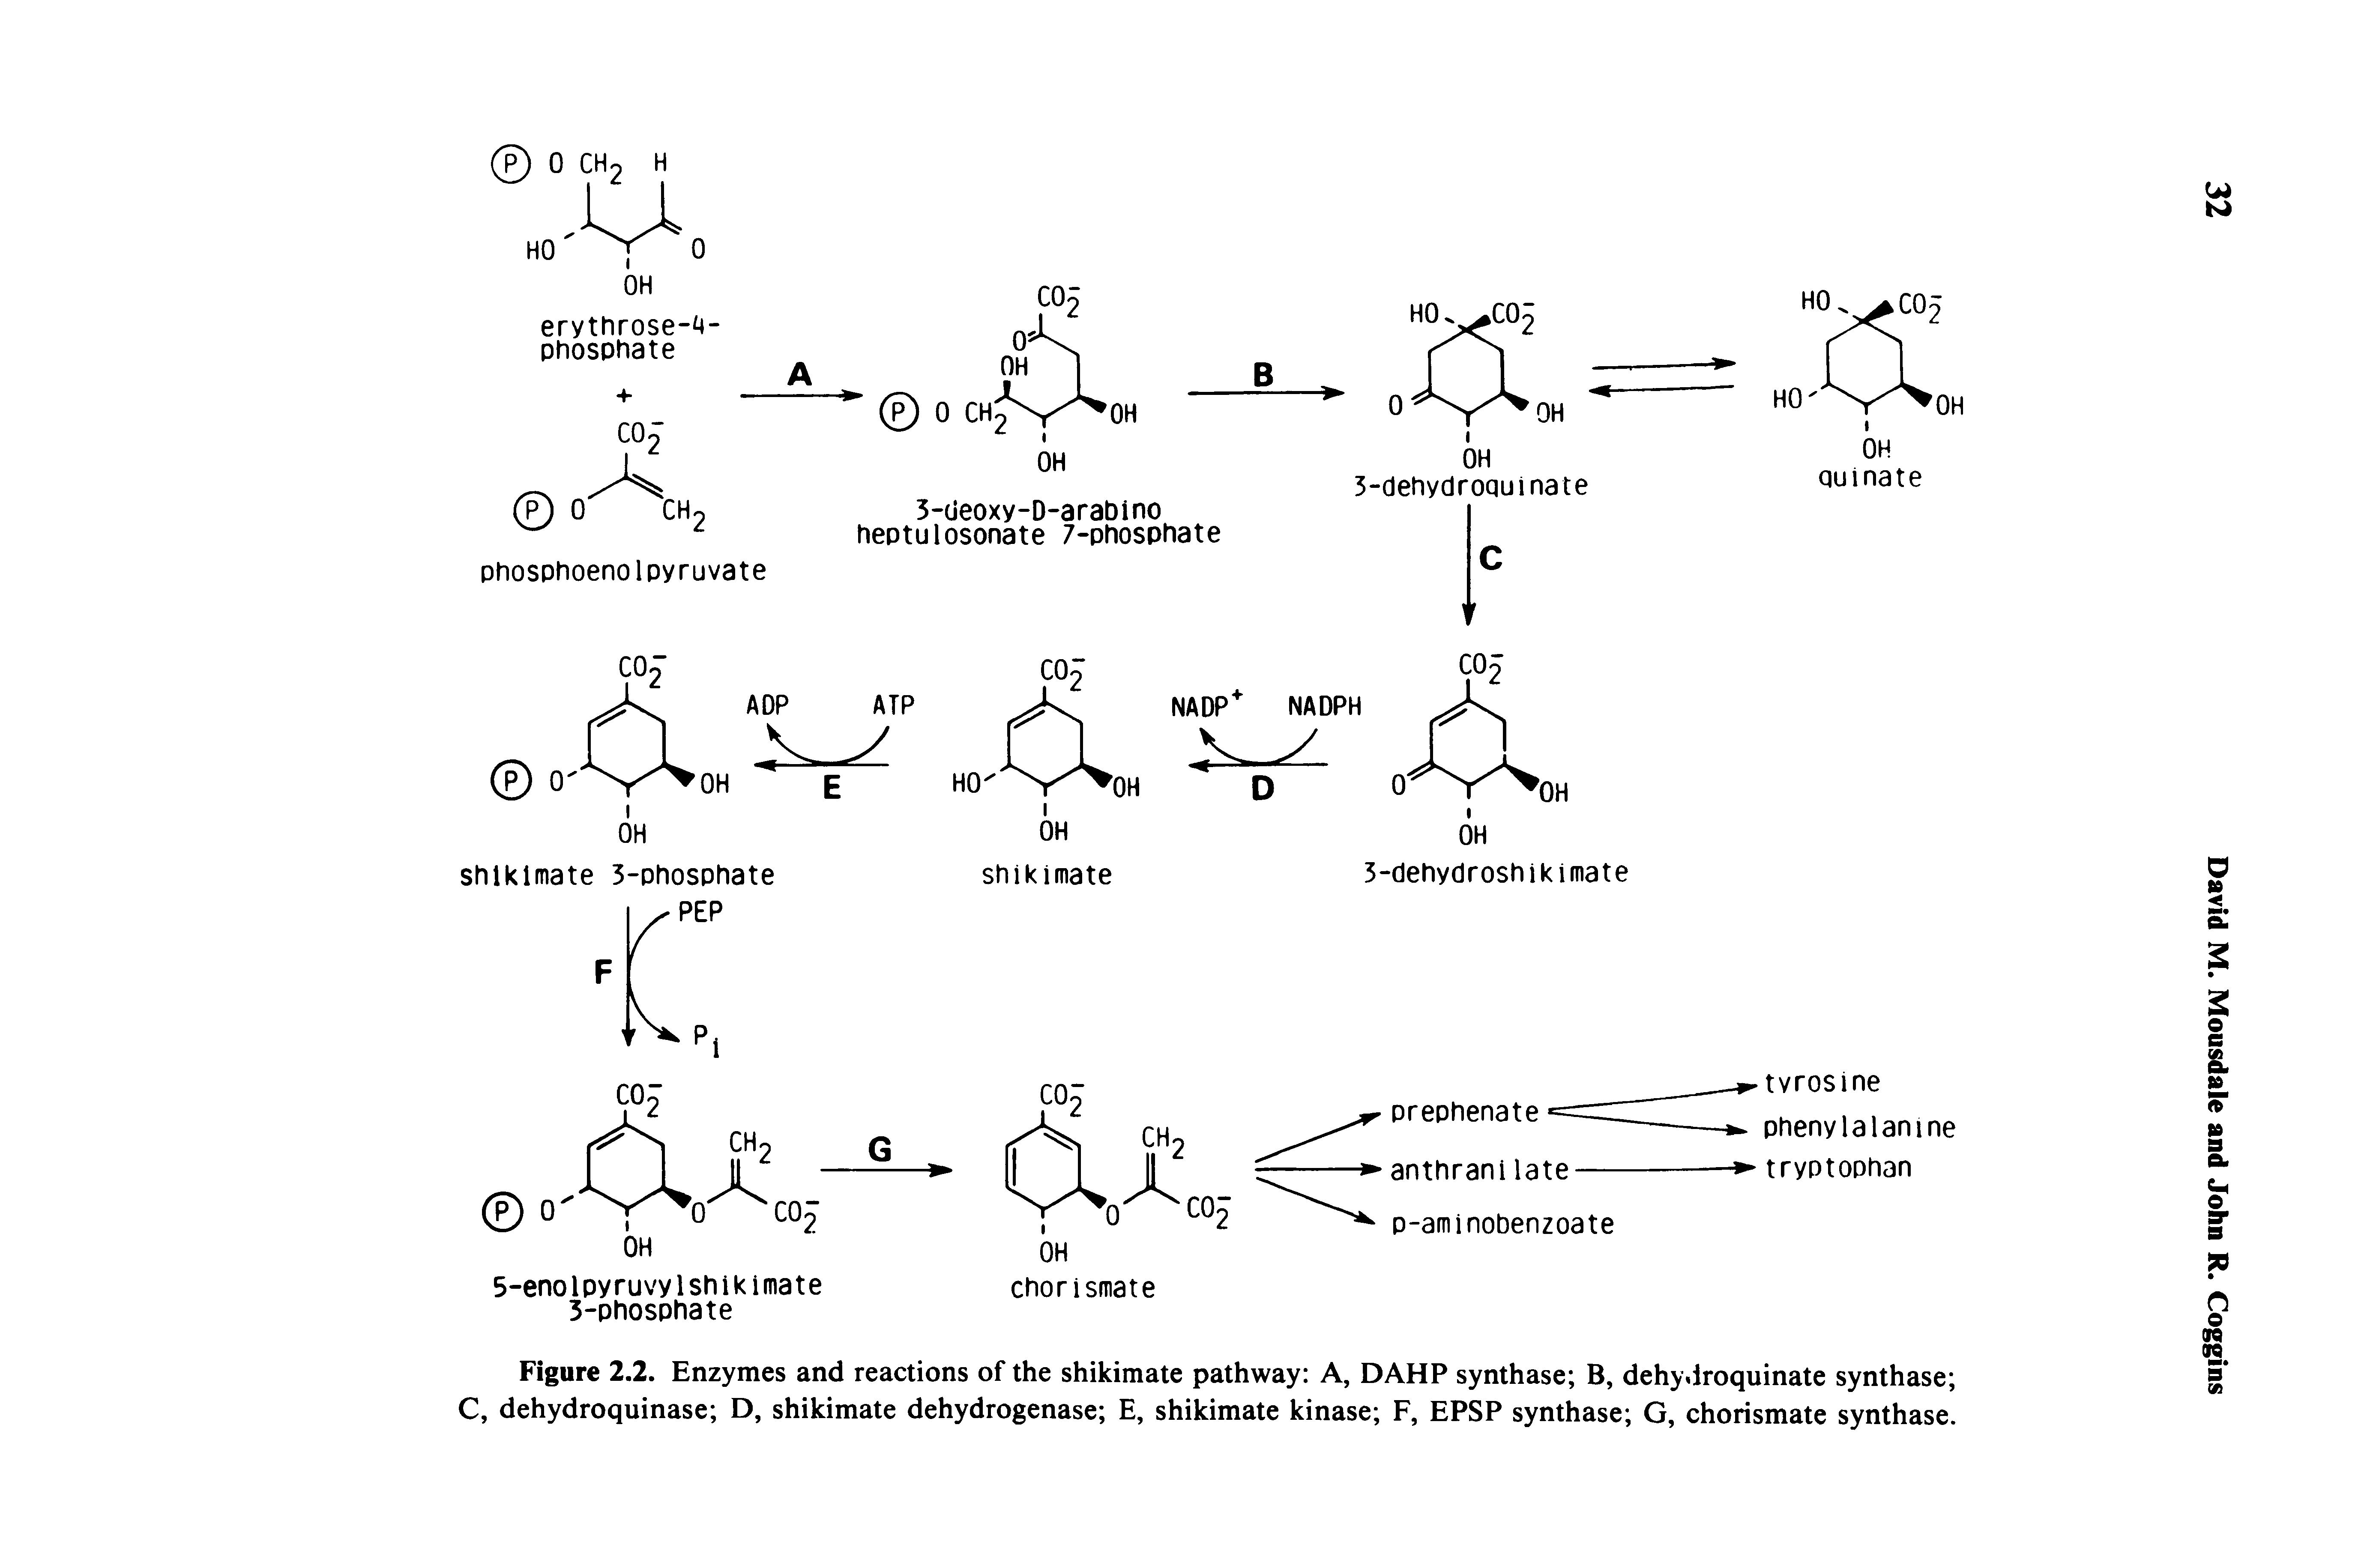 Figure 2.2. Enzymes and reactions of the shikimate pathway A, DAMP synthase B, dehydroquinate synthase C, dehydroquinase D, shikimate dehydrogenase E, shikimate kinase F, EPSP synthase G, chorismate synthase.